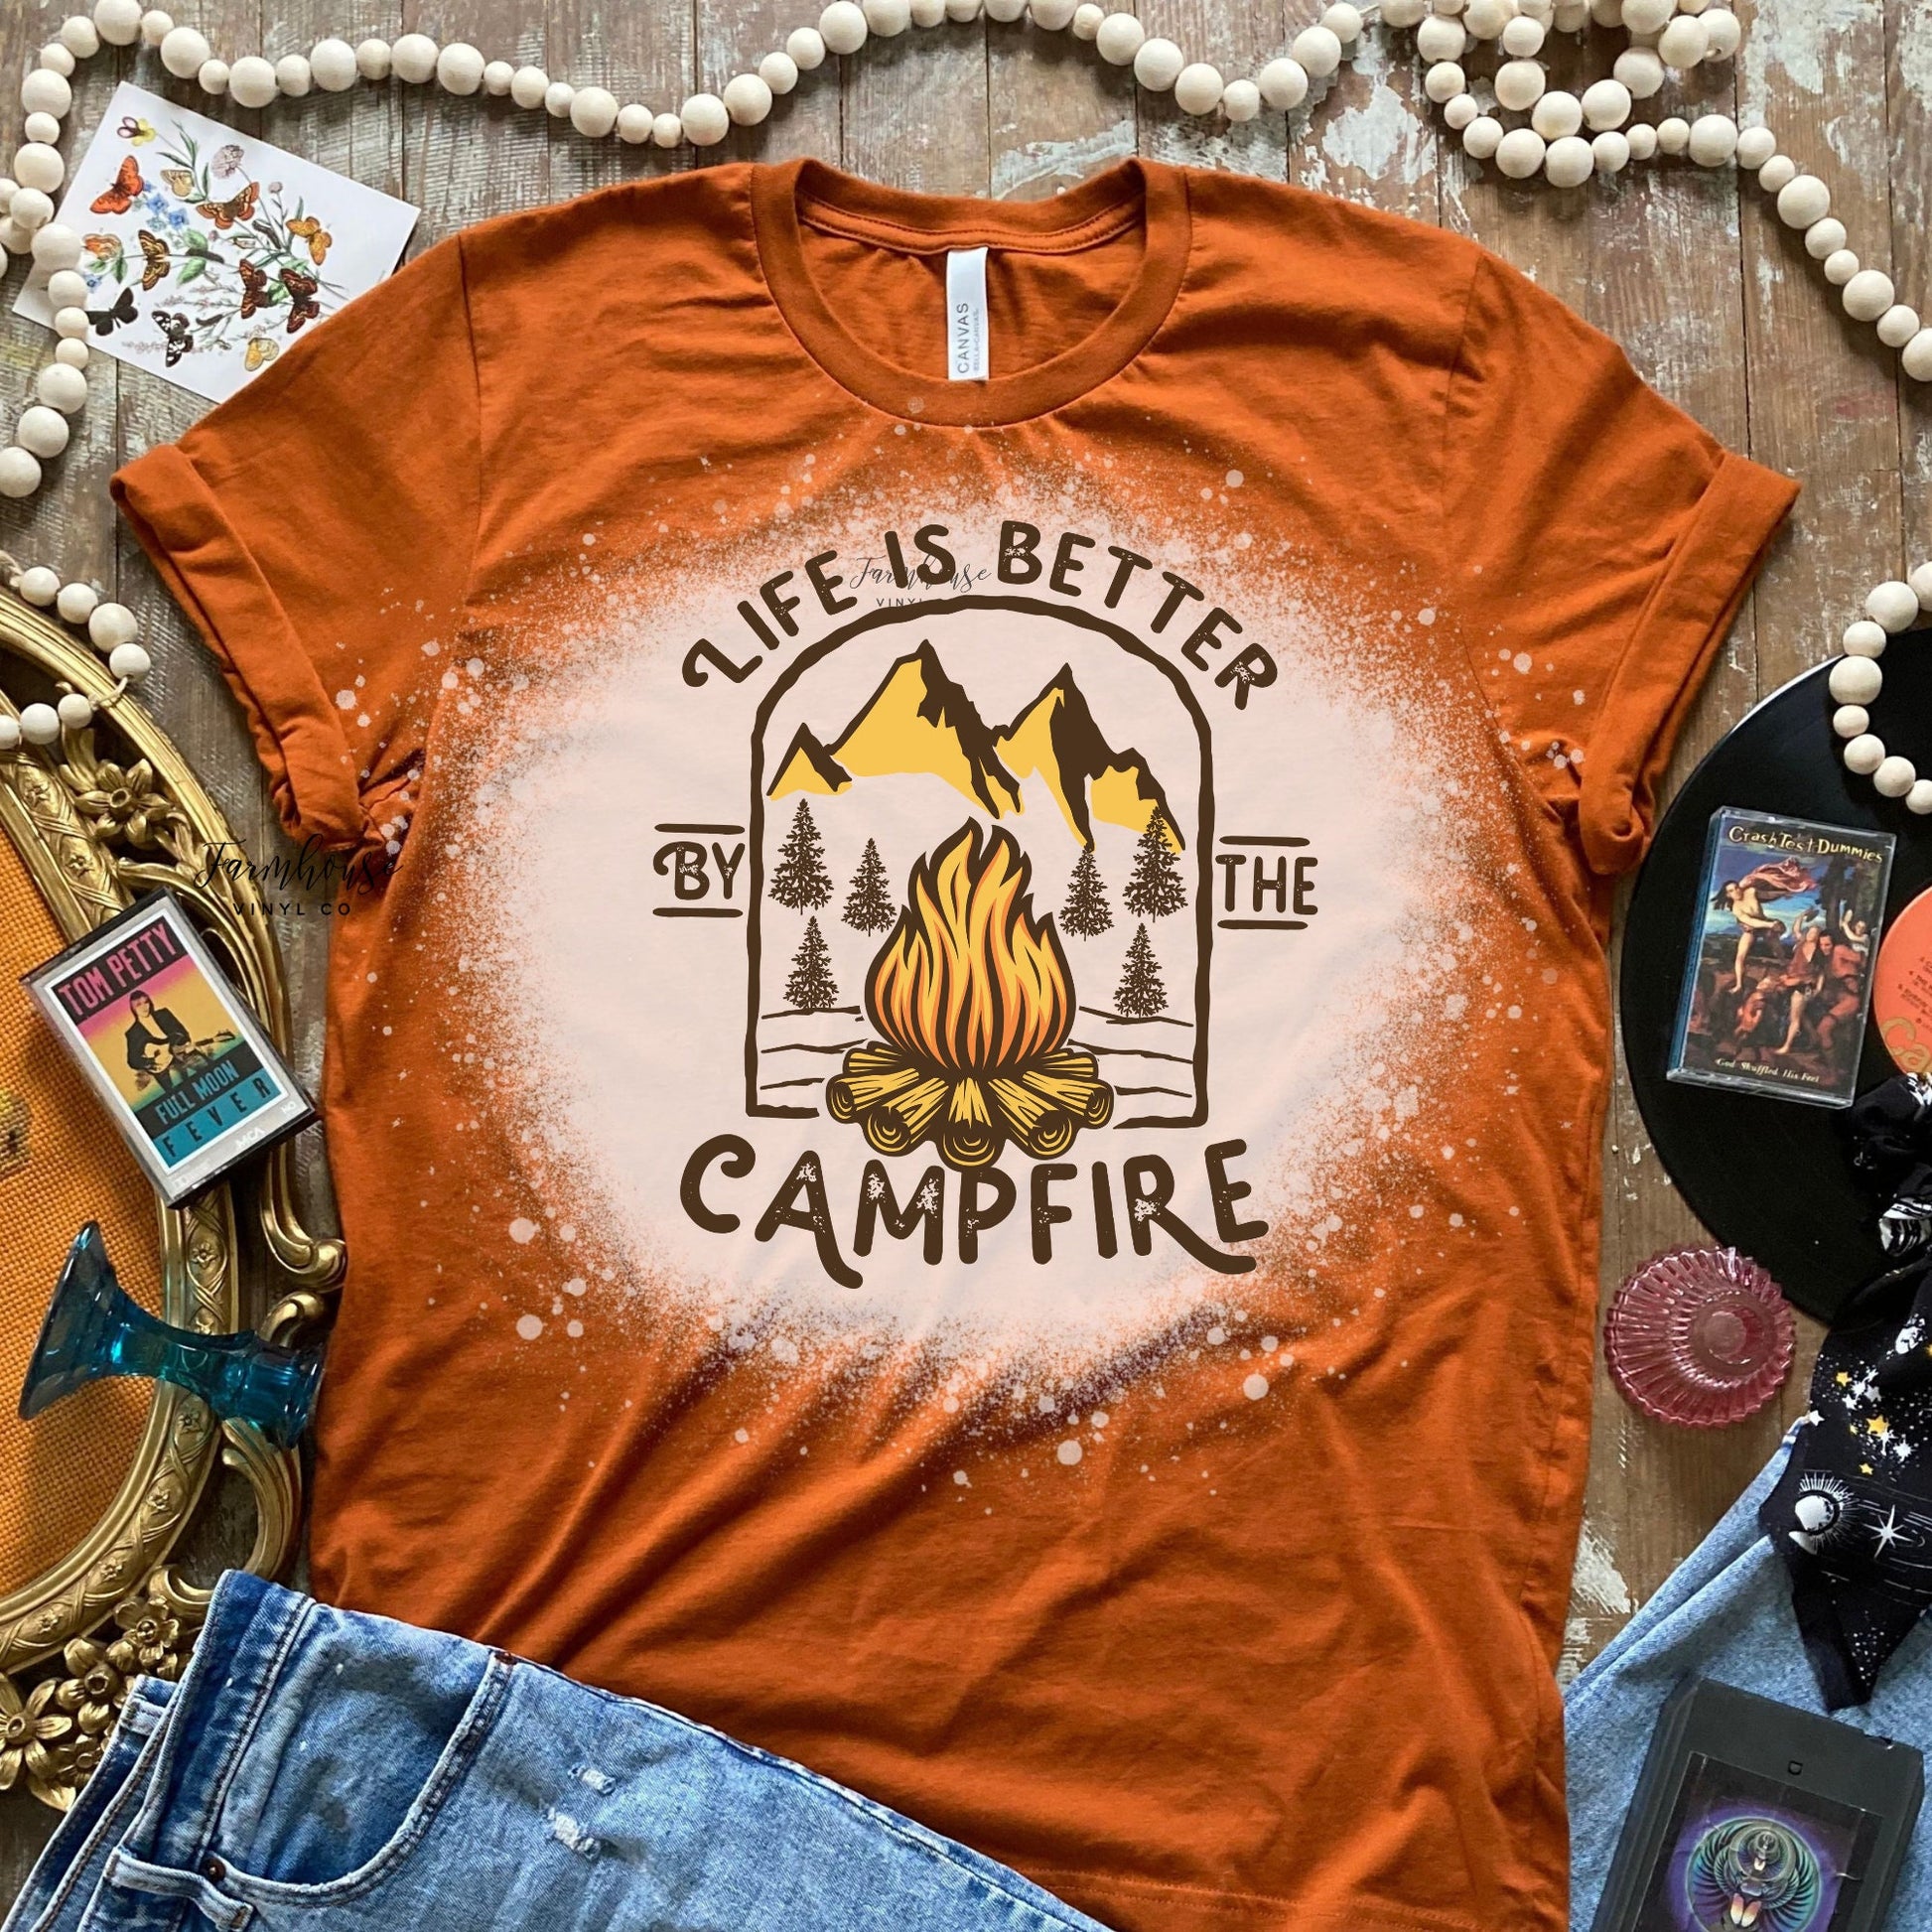 Life is Better by the Campfire Bleached Shirt / Summer Vacation Shirts / NP Souvenir Shirt / Camping Road Trip / Lets Take A Roadtrip - Farmhouse Vinyl Co